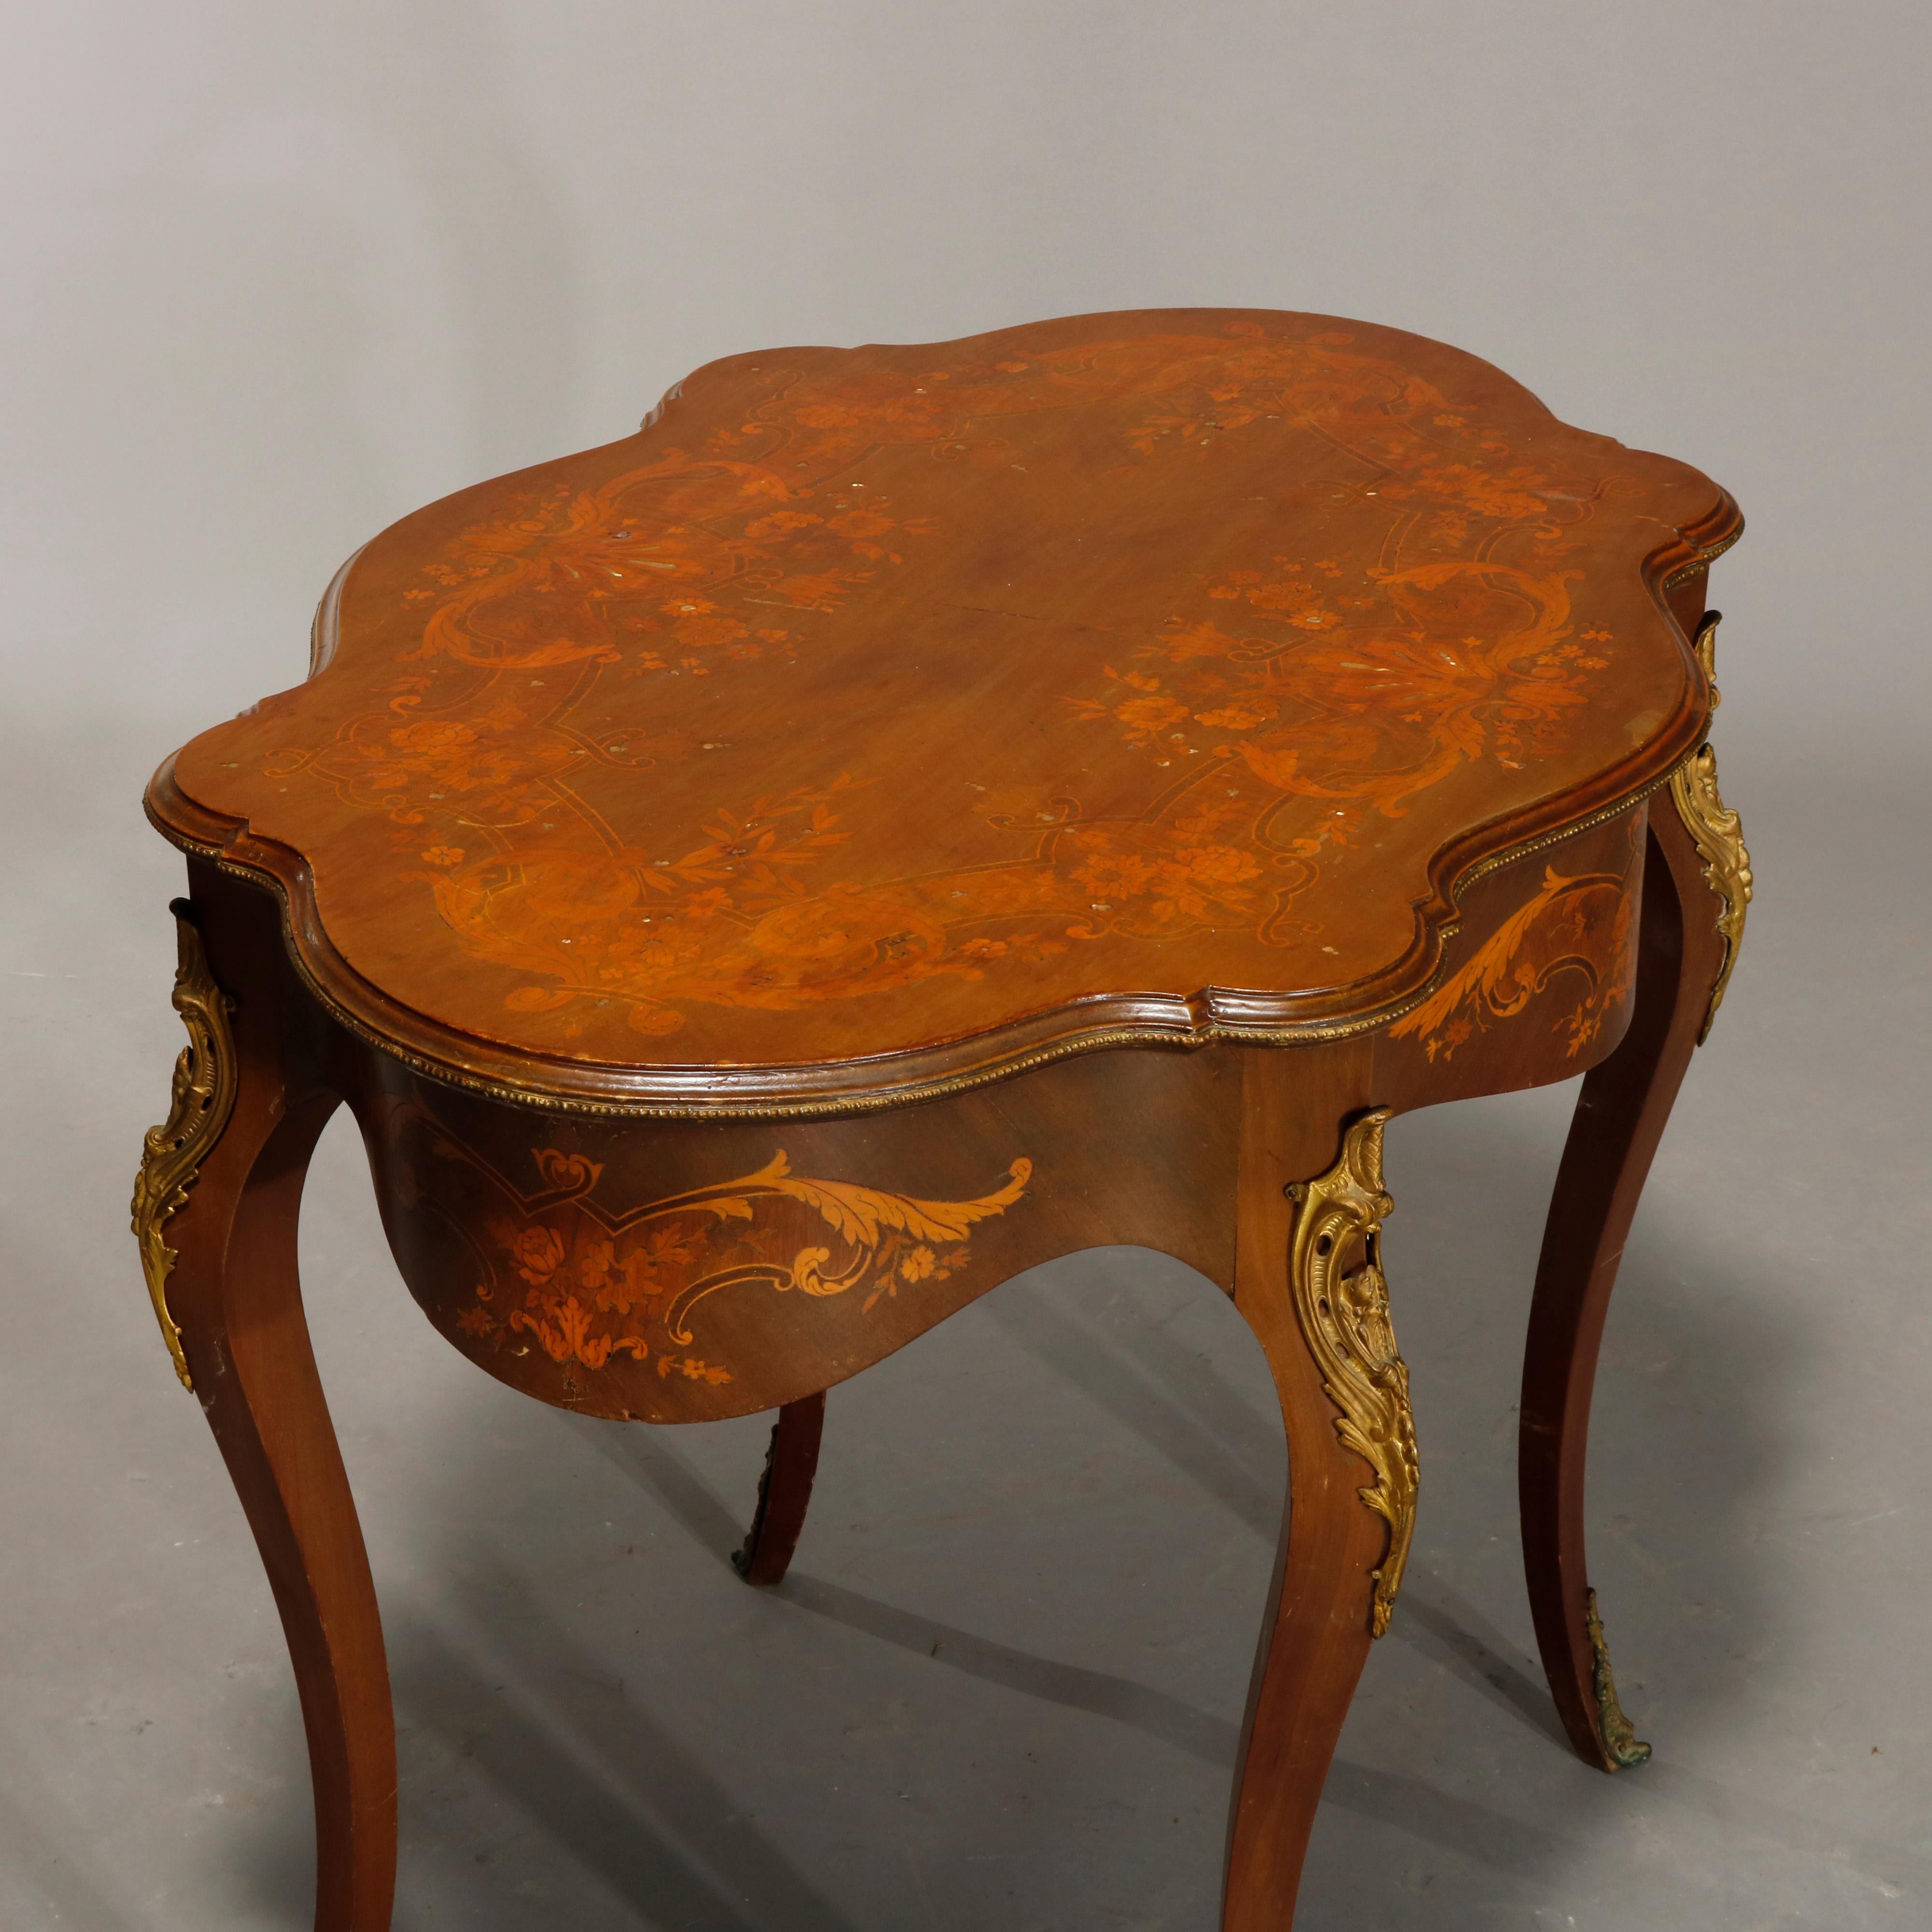 An antique French Louis XIV turtle top center table offers mahogany construction with shaped top having satinwood marquetry inlaid top in scroll and foliate design, shaped skirt also having inlaid reserve, raised on cabriole legs having foliate cast